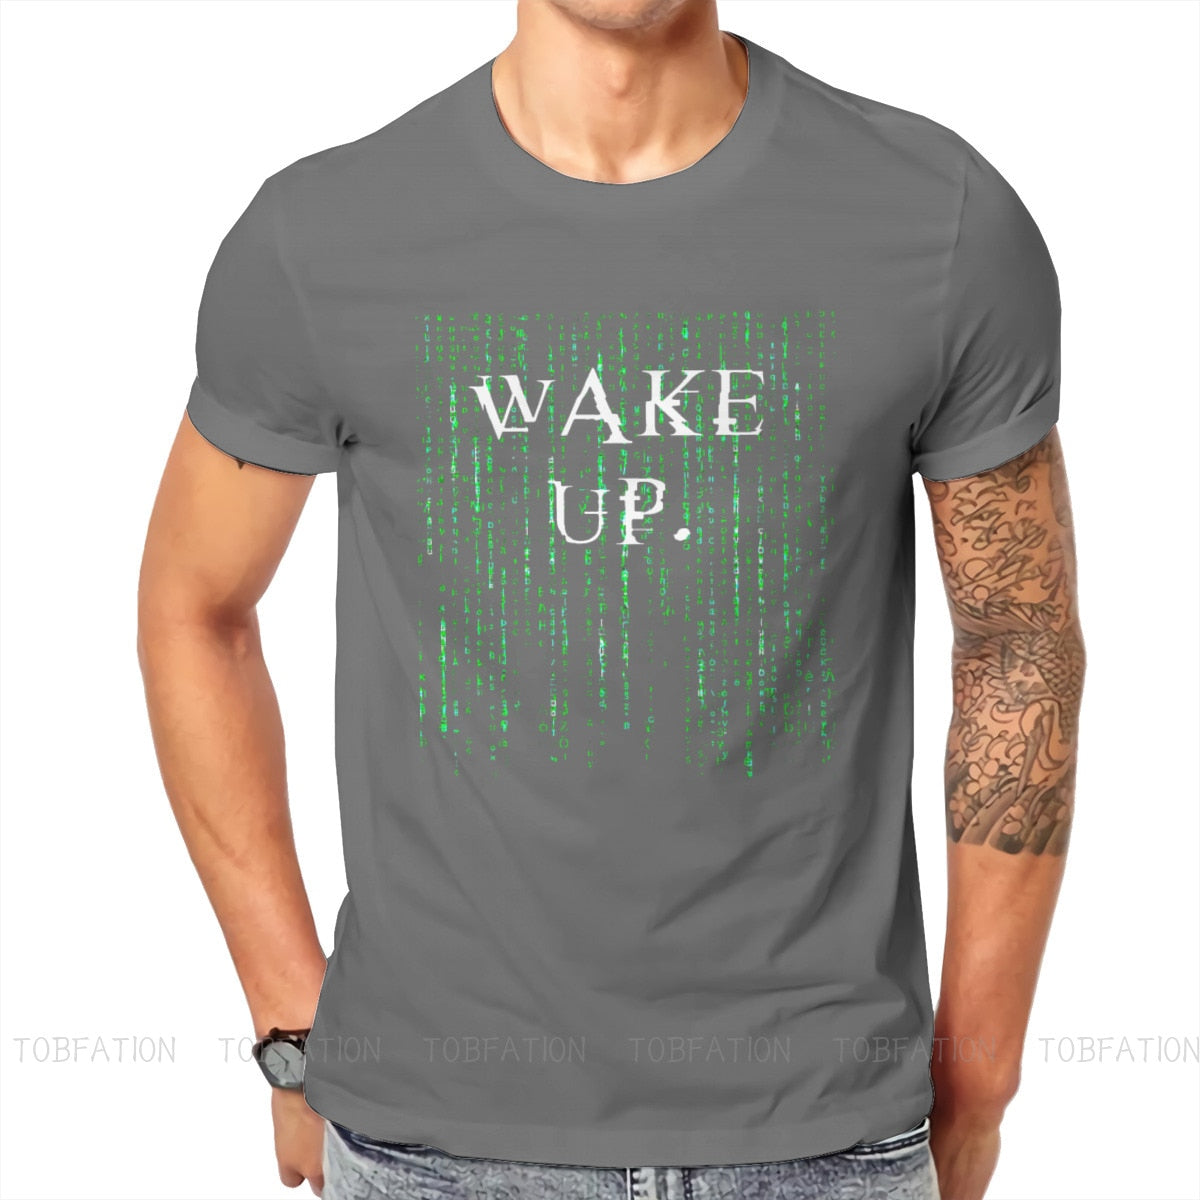 M-8XL Wake Up Tee - 3 COLOURS